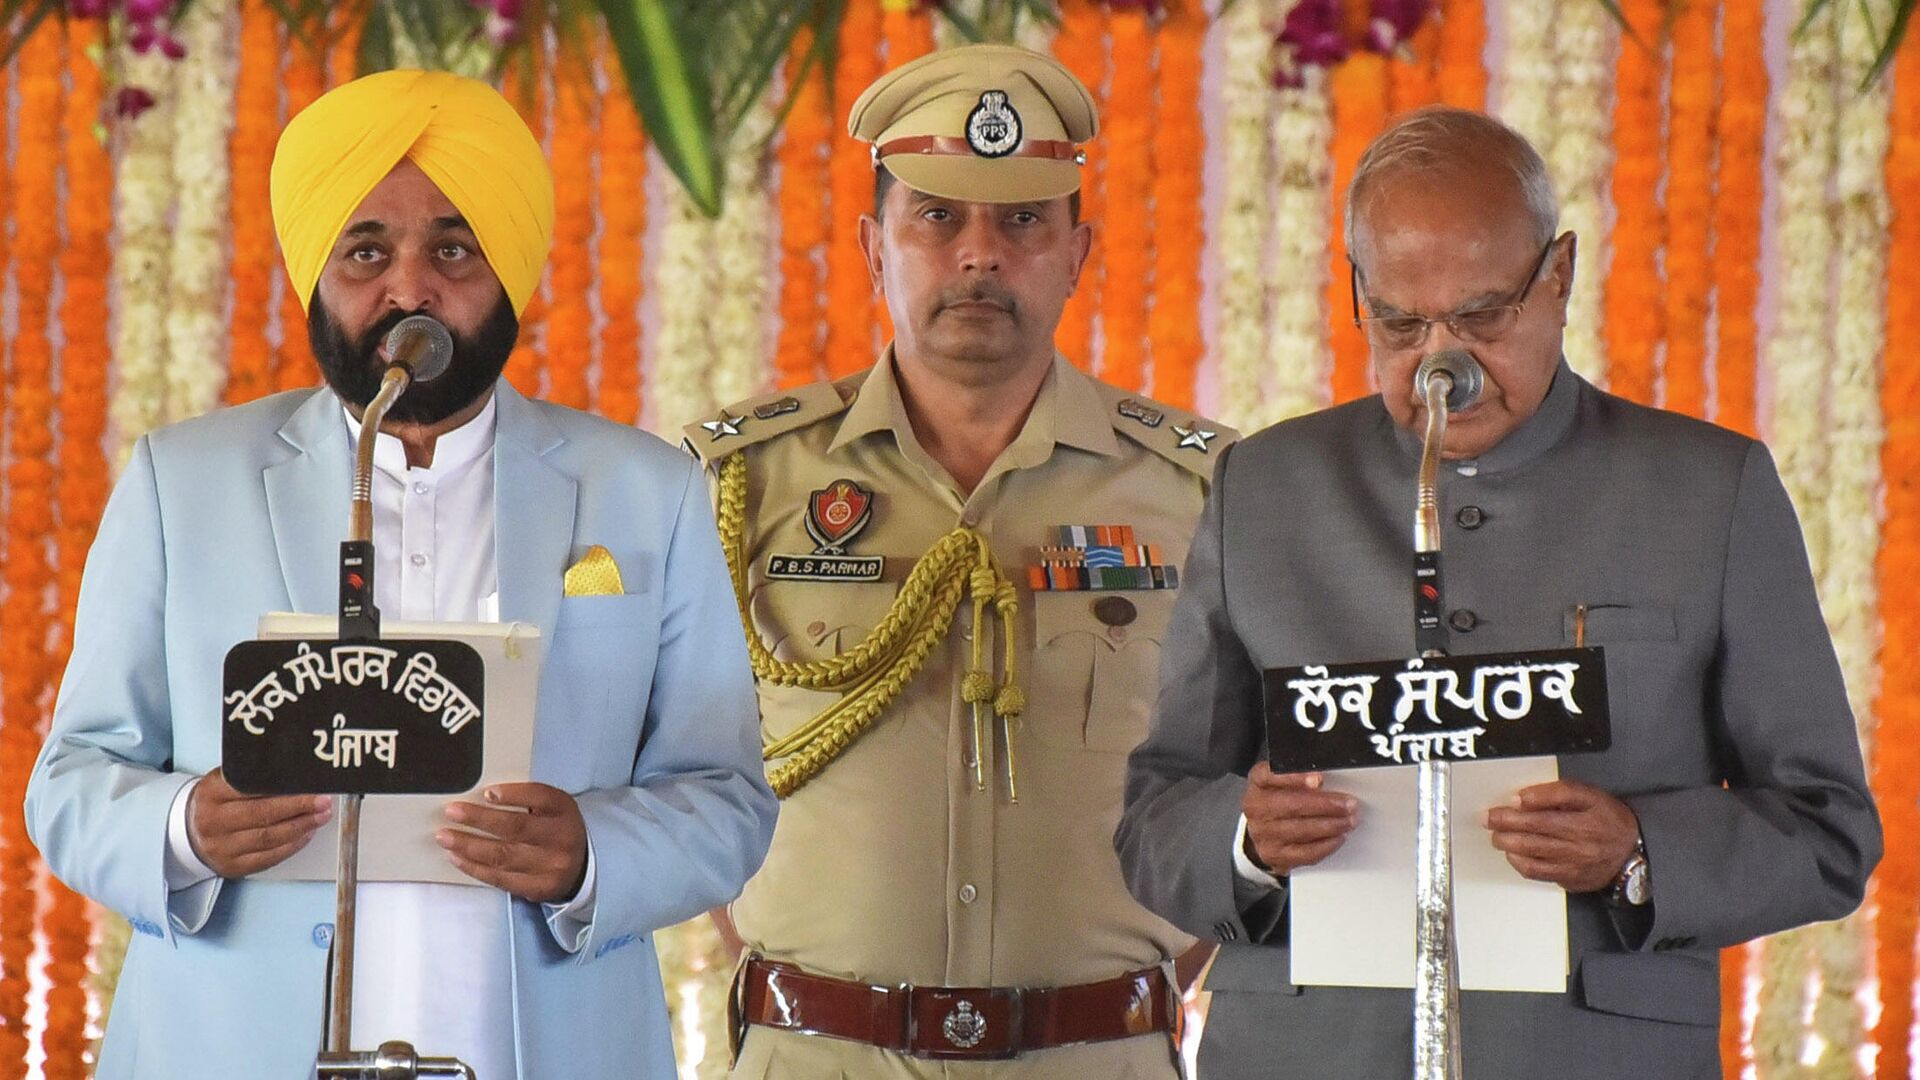 Governor Banwarilal Purohit, right, administers the oath to Bhagwant Mann, left as Punjab’s new chief minister during a swearing-in ceremony at Khatkar Kalan, in Nawanshahr district, Punjab, India, Wednesday, March 16, 2022 - Sputnik International, 1920, 16.03.2022